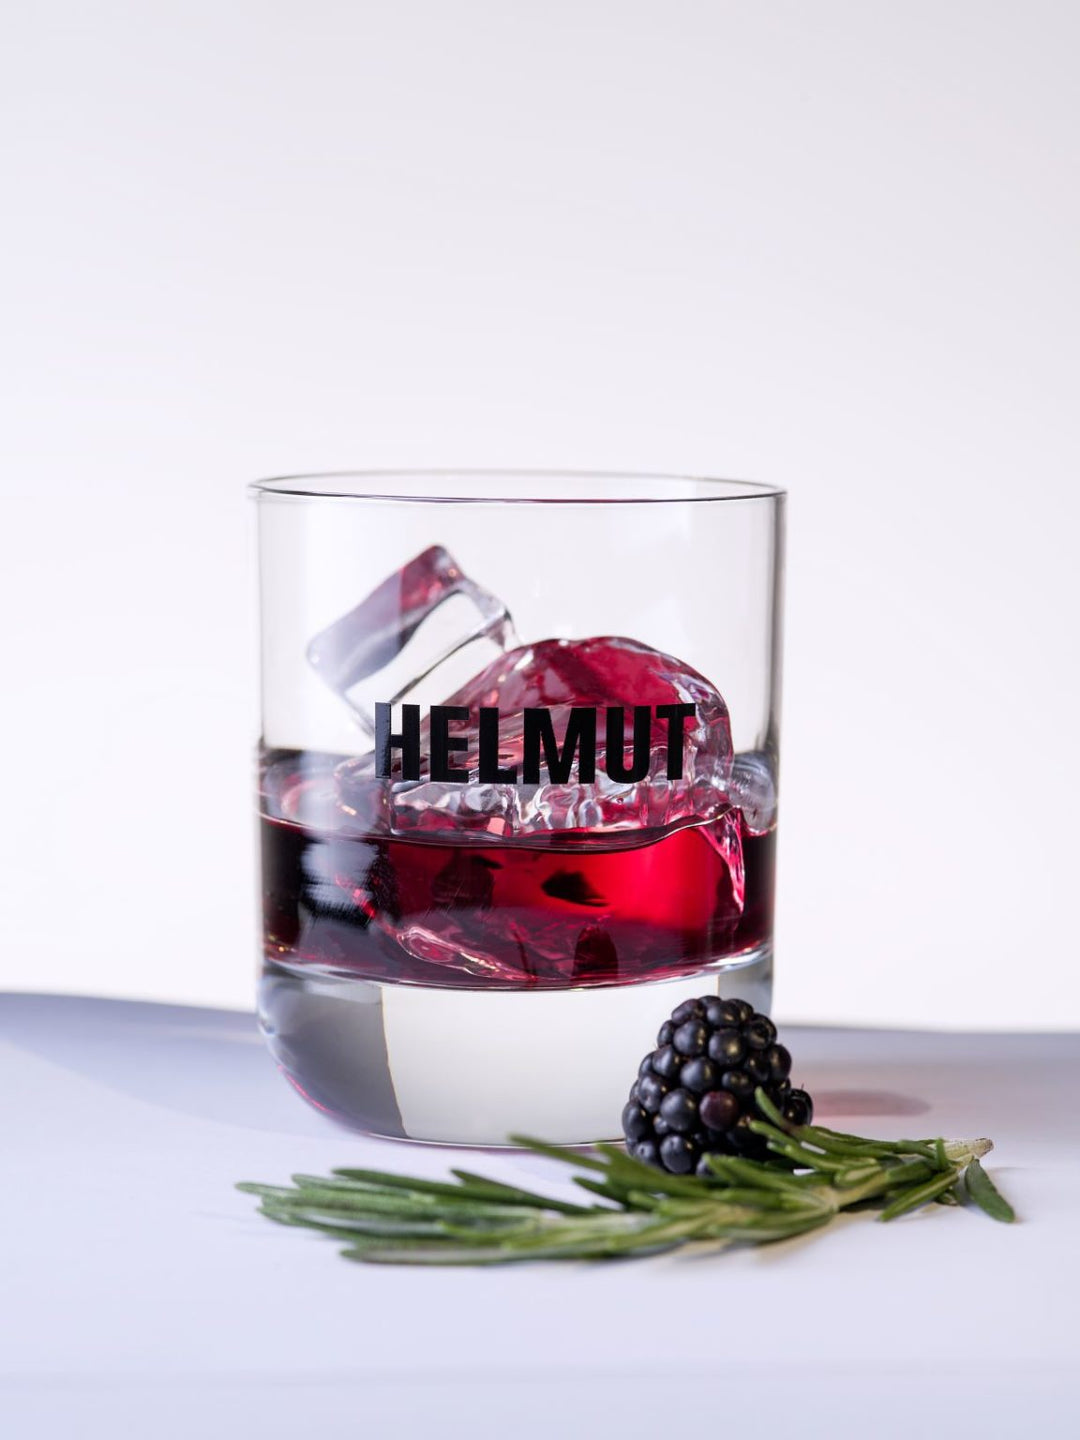 Helmut - The Red Vermouth